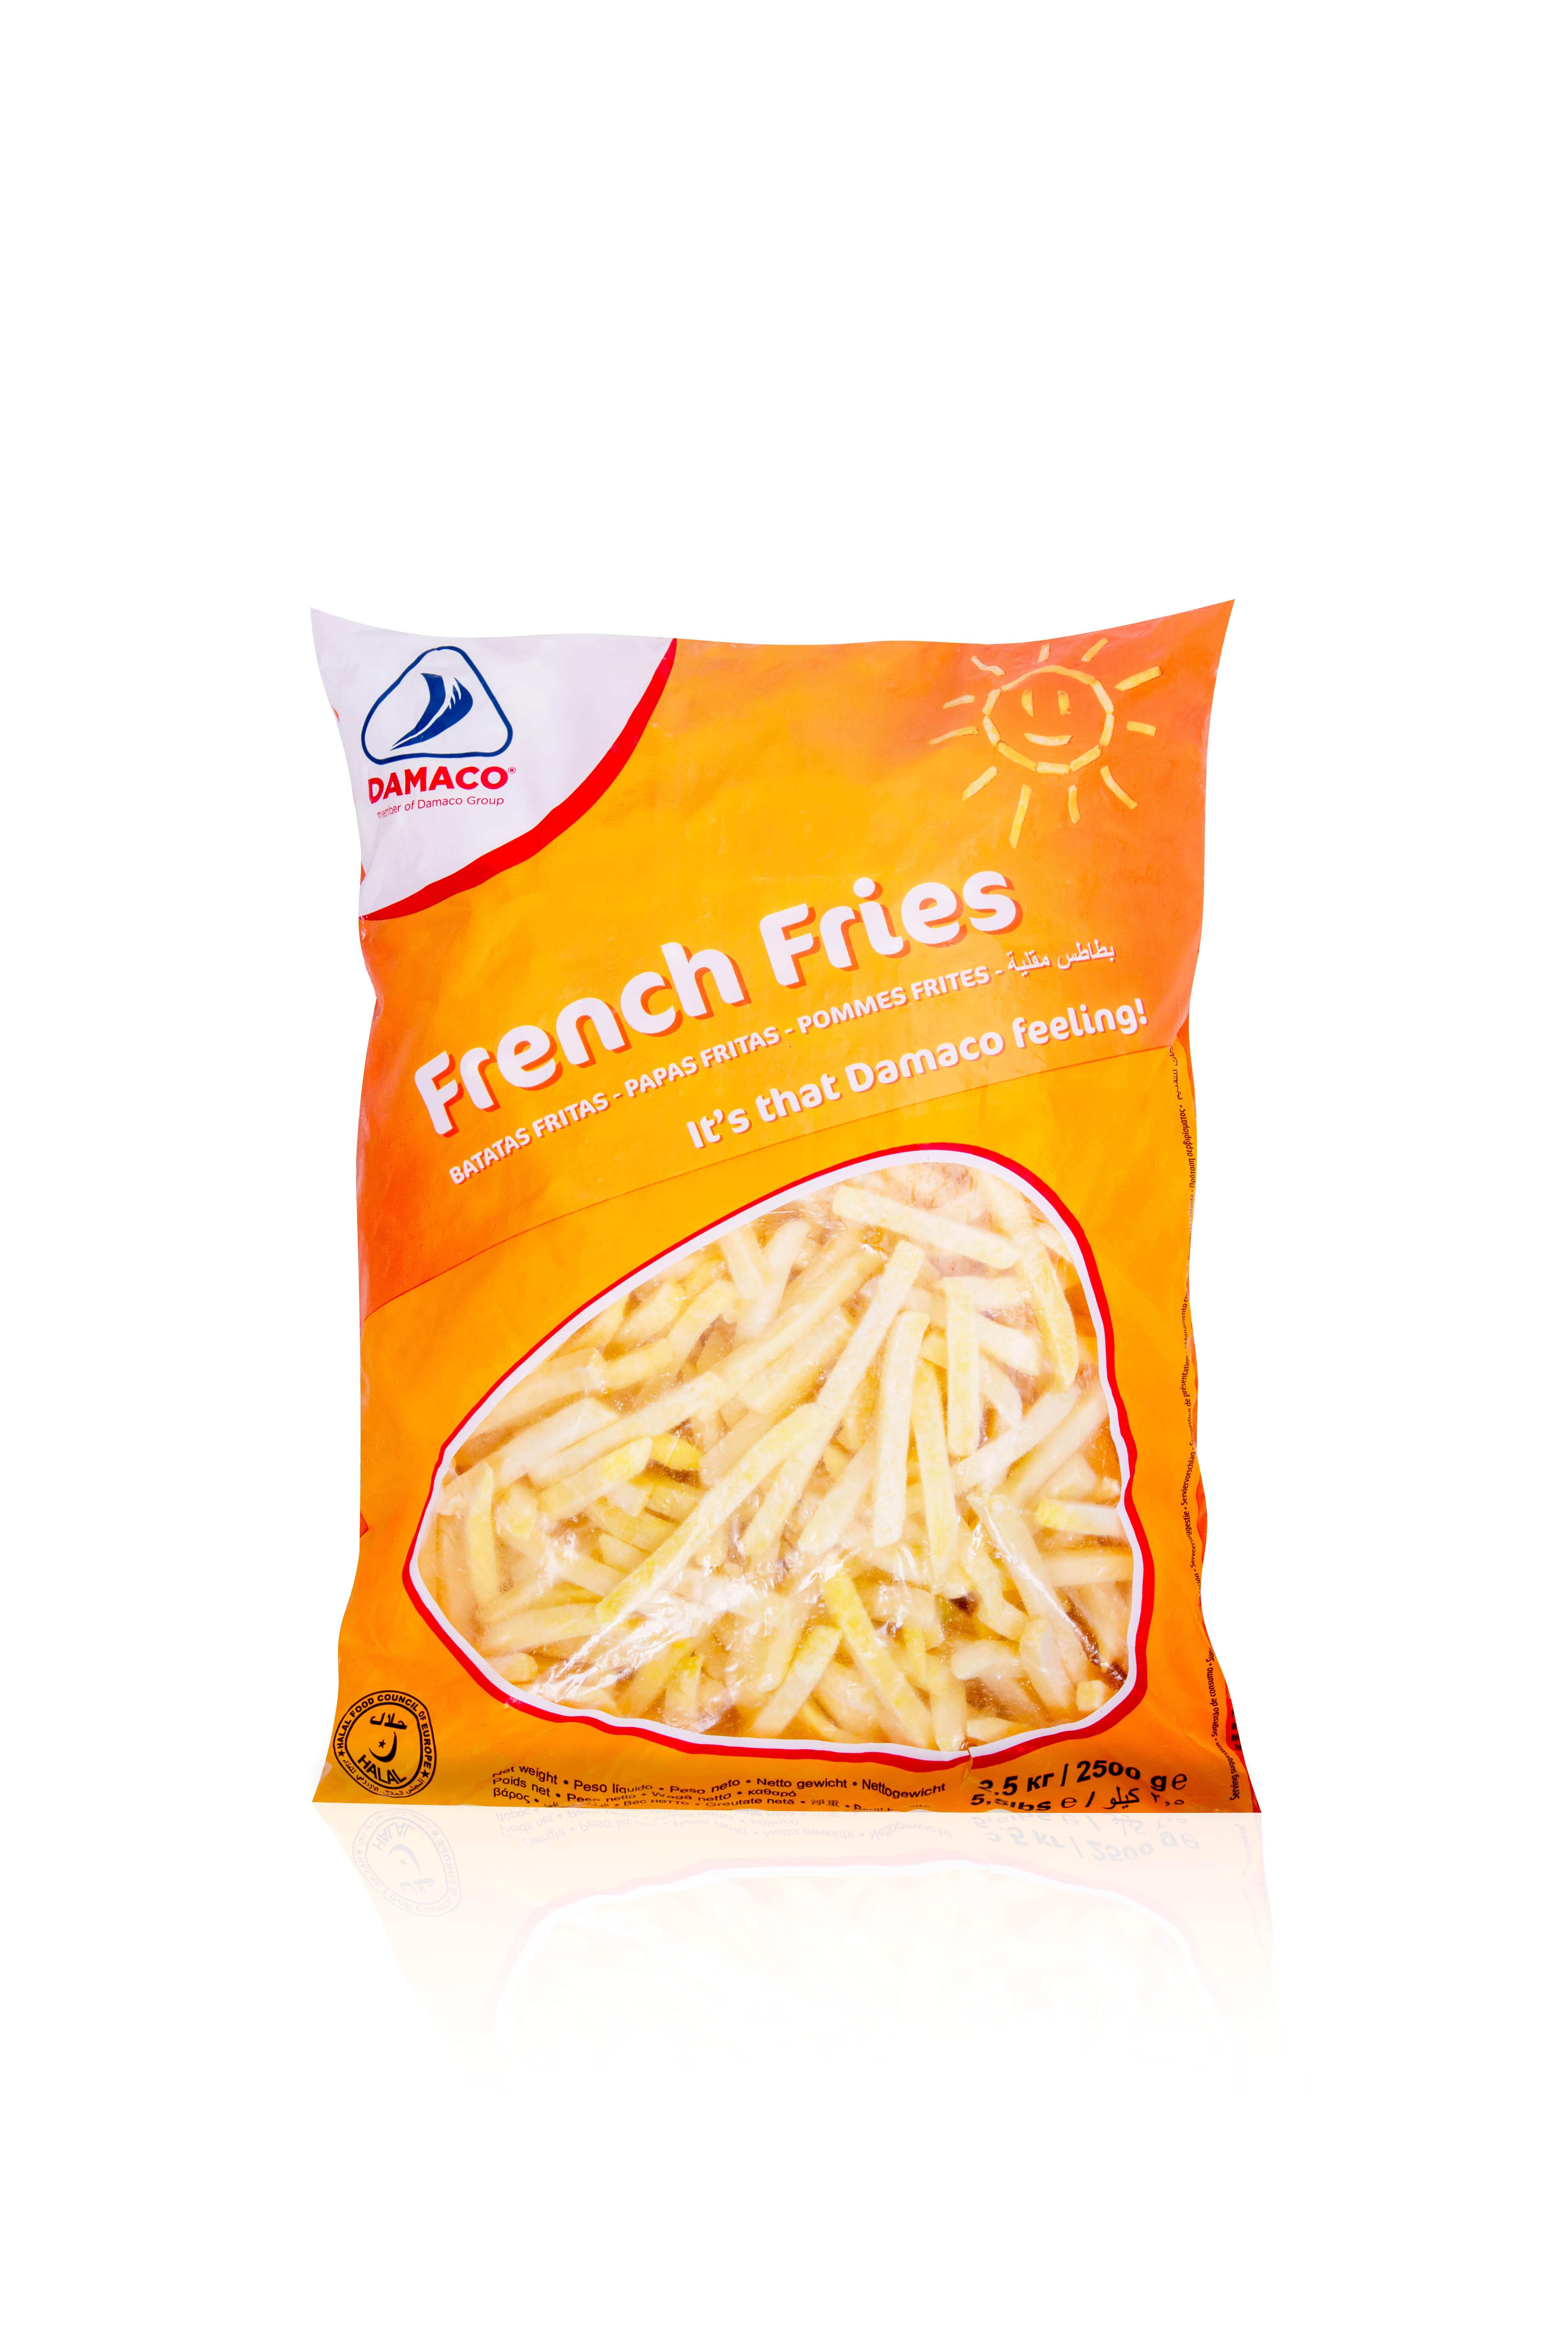 French fries 9x9mm packaging Damaco brand